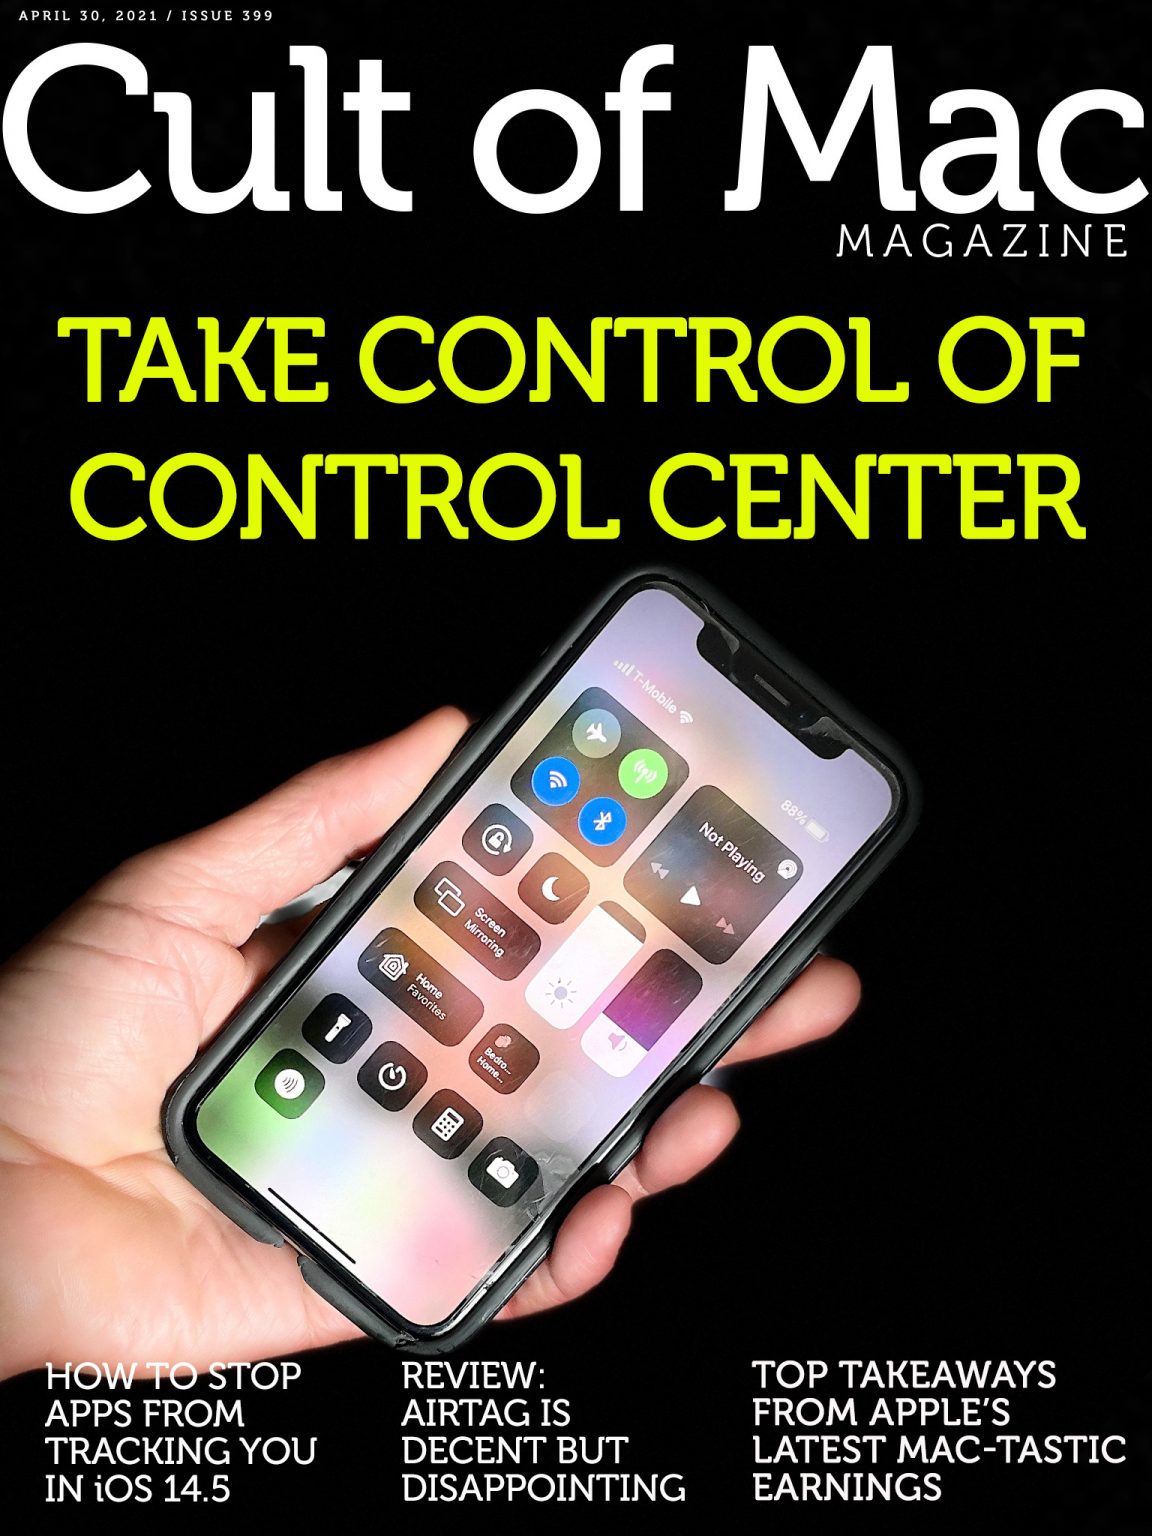 Take control of Control Center: Squeeze some extra utility out of your Apple gear with these Control Center tips.